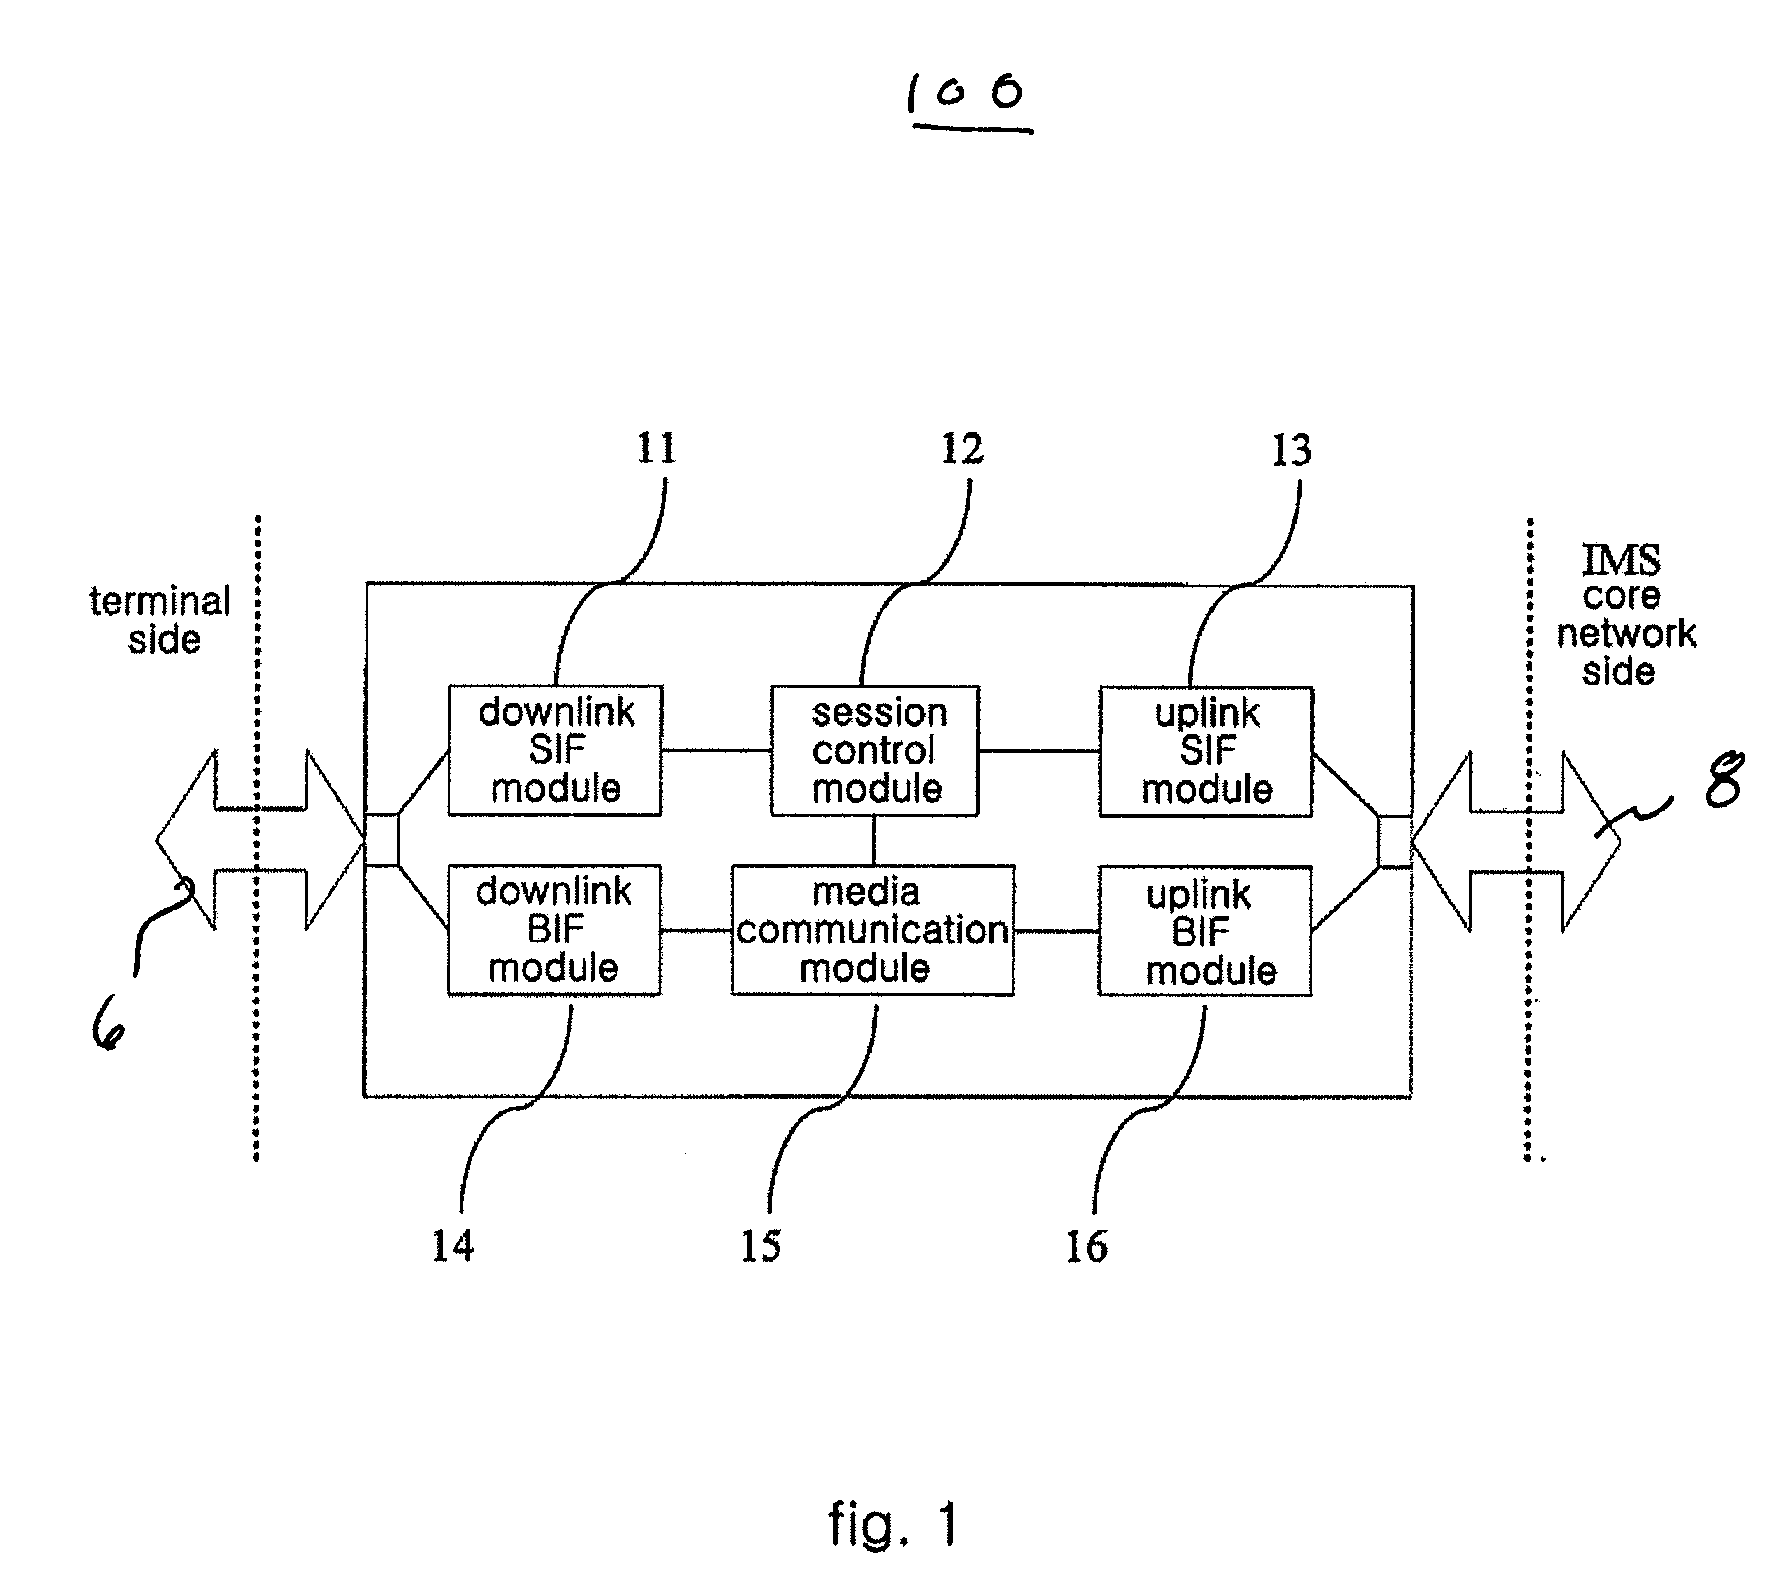 Apparatus for a traditional terminal to access an IMS system and the method thereof